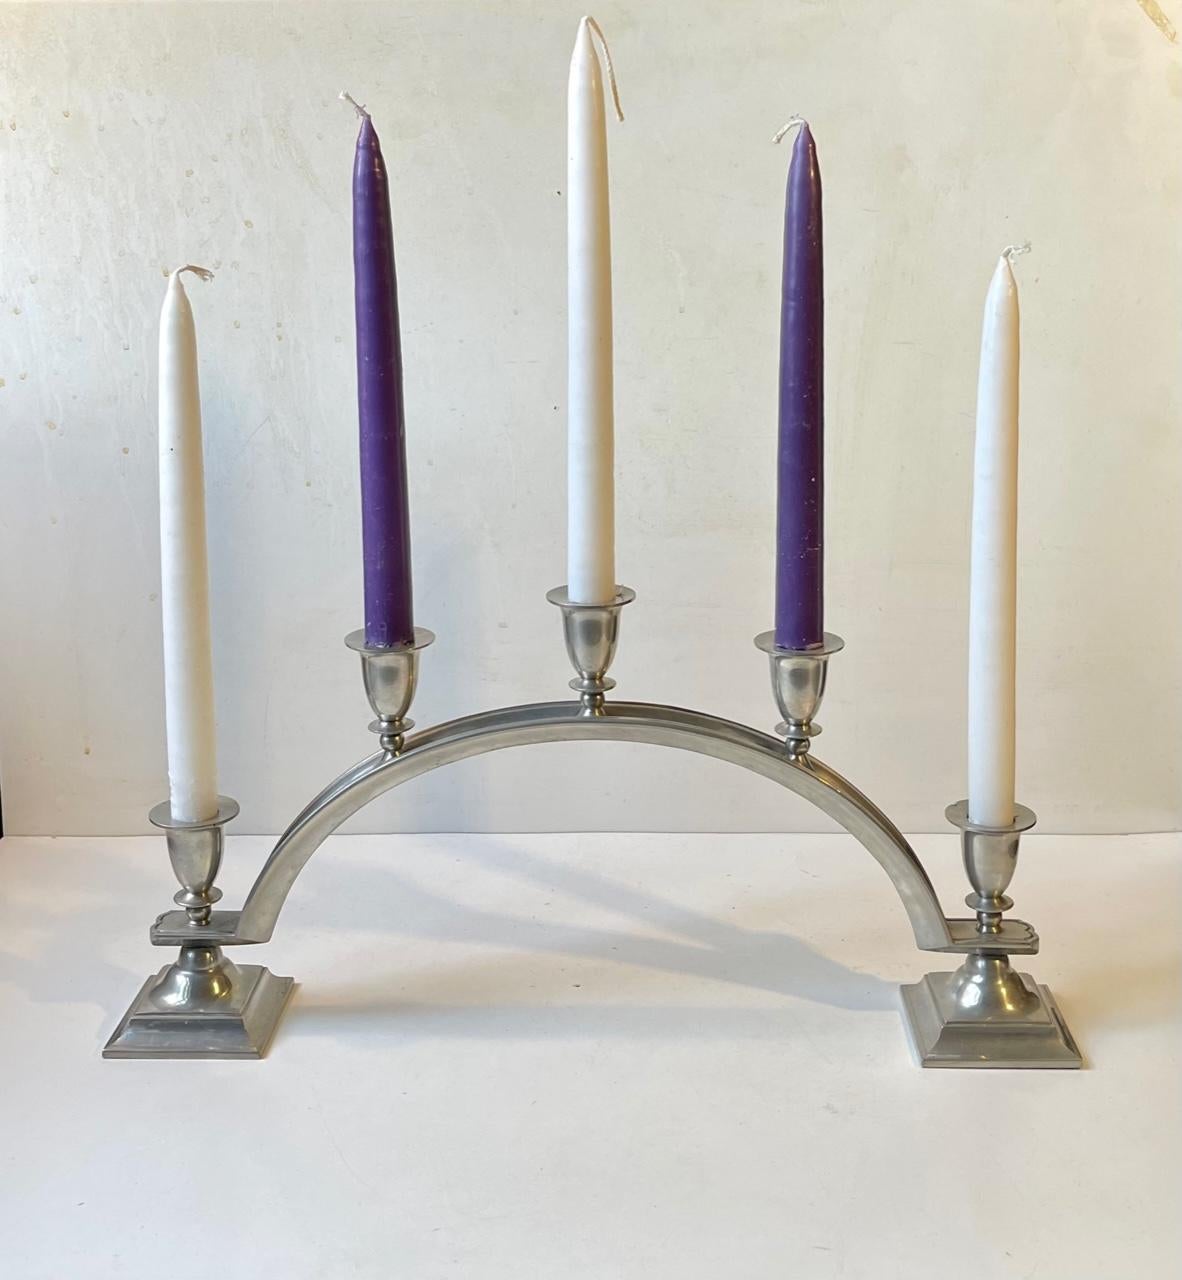 Just Andersen Arched Art Deco Candelabra in Pewter, 1940s For Sale 2